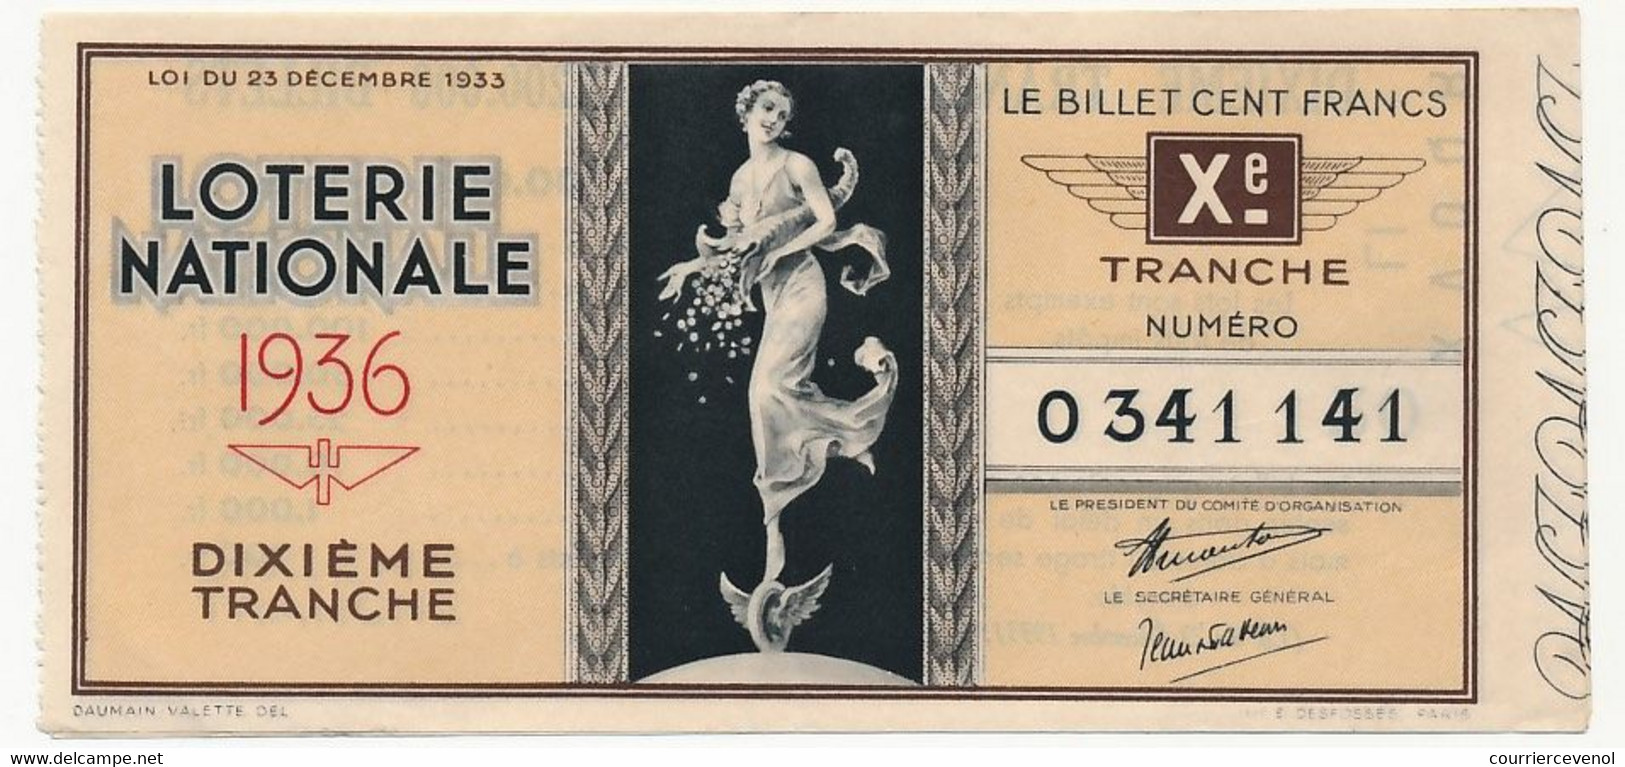 FRANCE - Loterie Nationale - Billet 10eme Tranche 1936 - Lottery Tickets